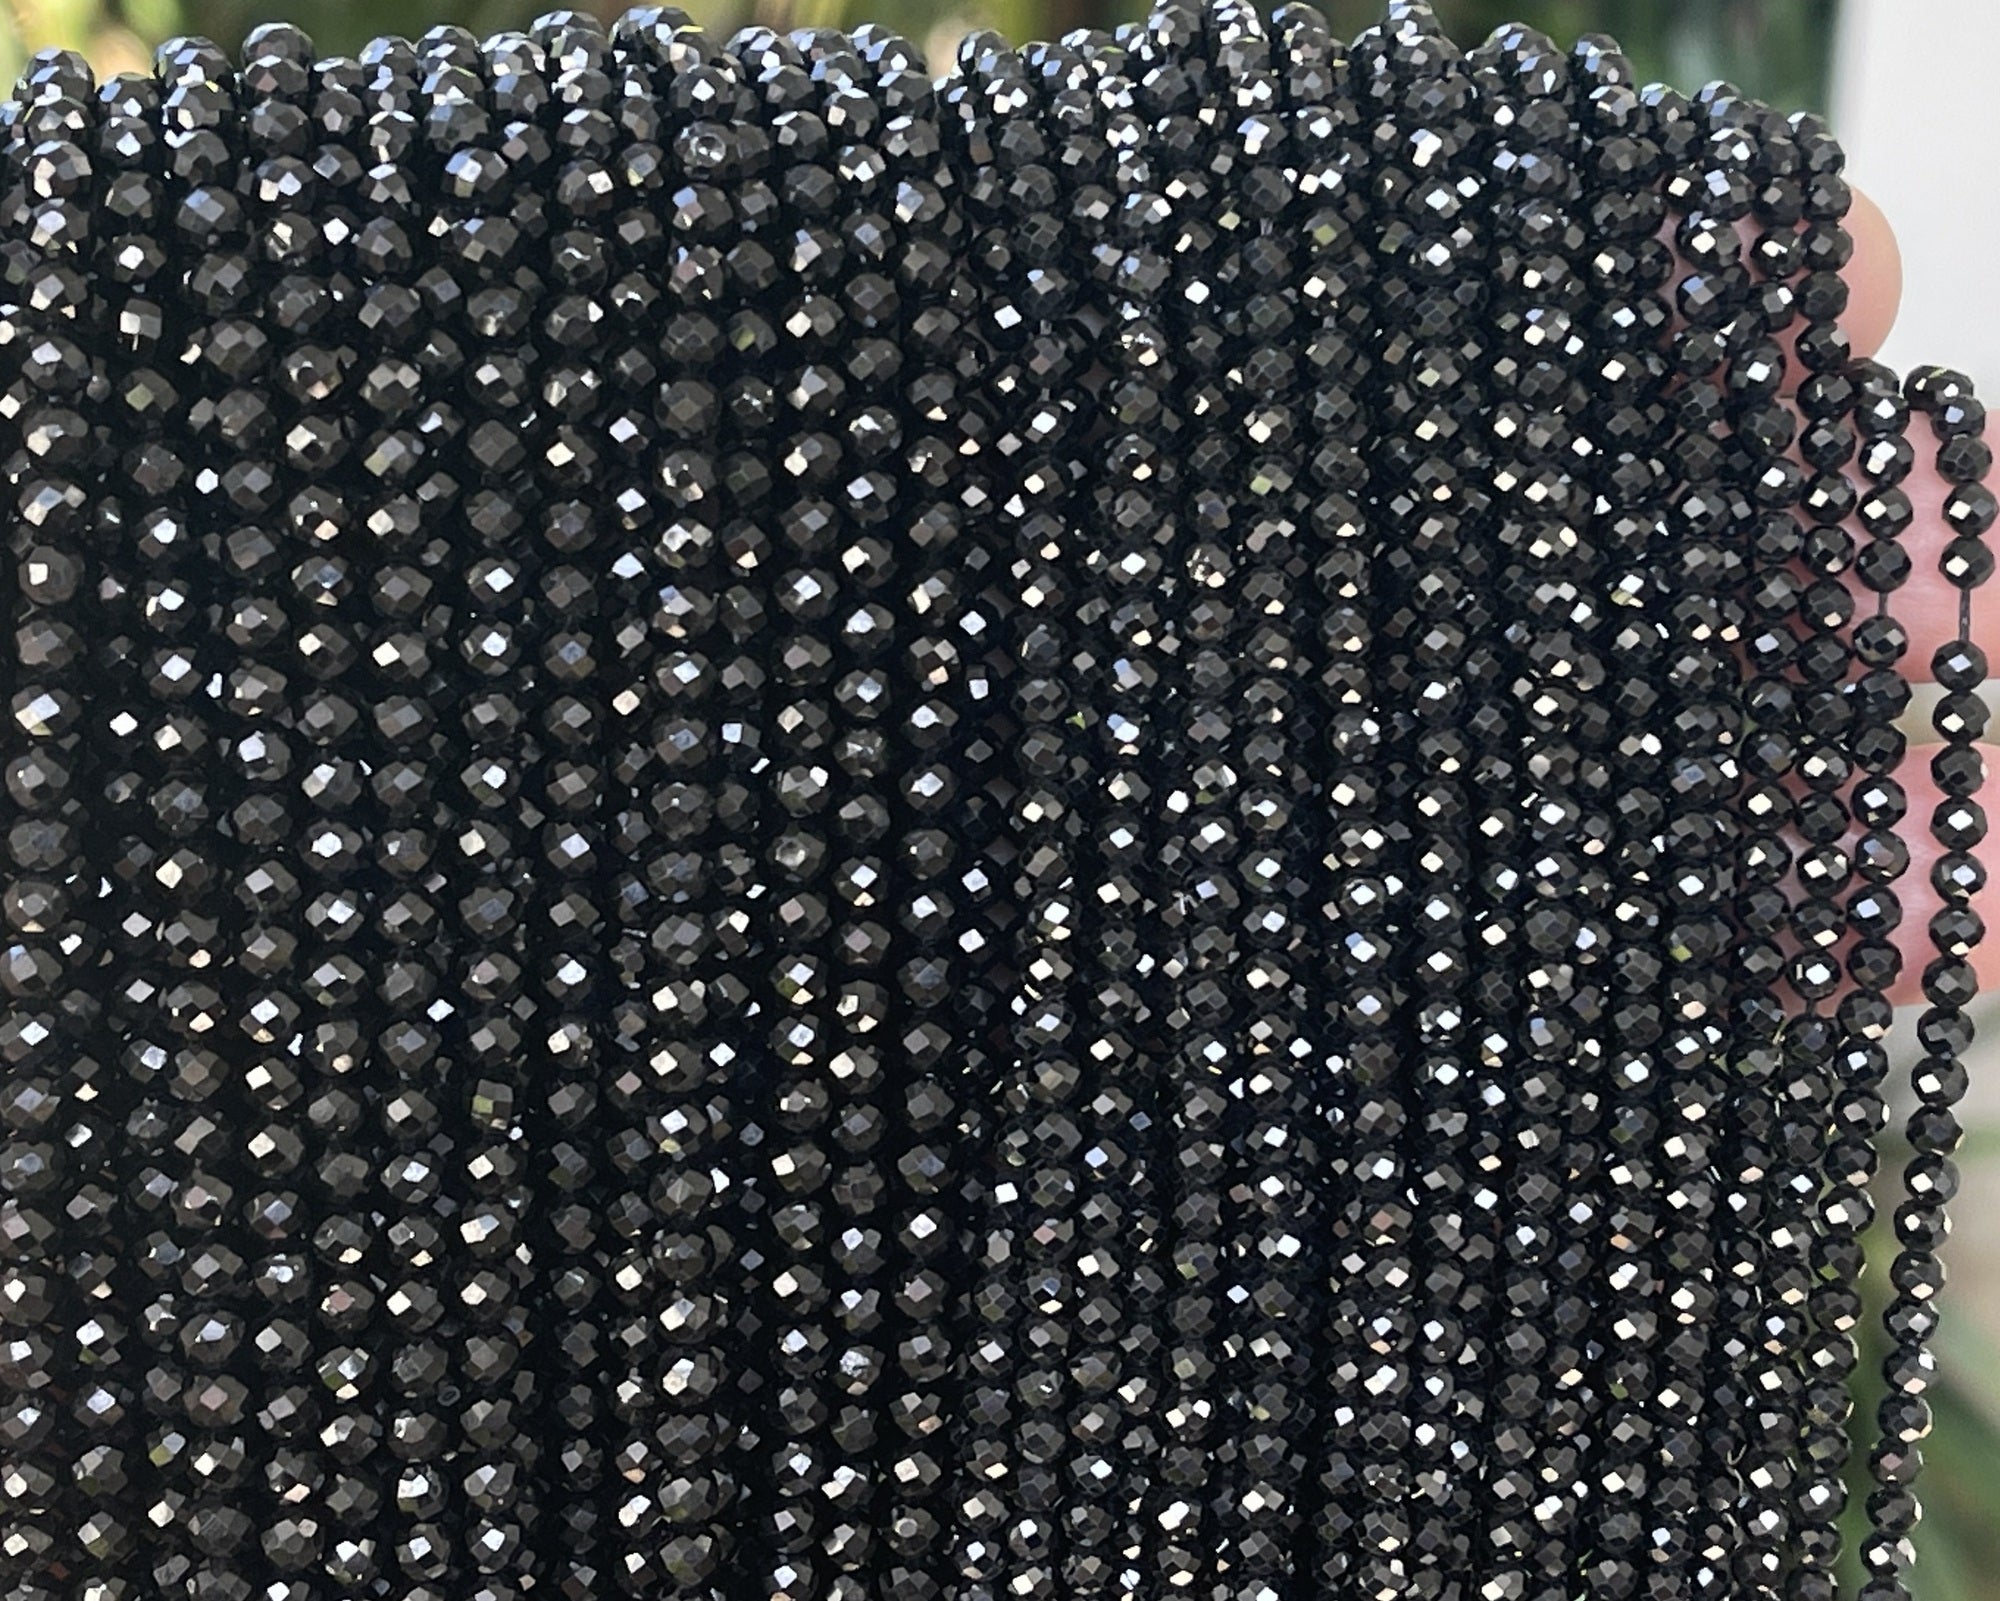 Black Spinel 3mm 4mm faceted round natural gemstone beads 15.5" strand - Oz Beads 